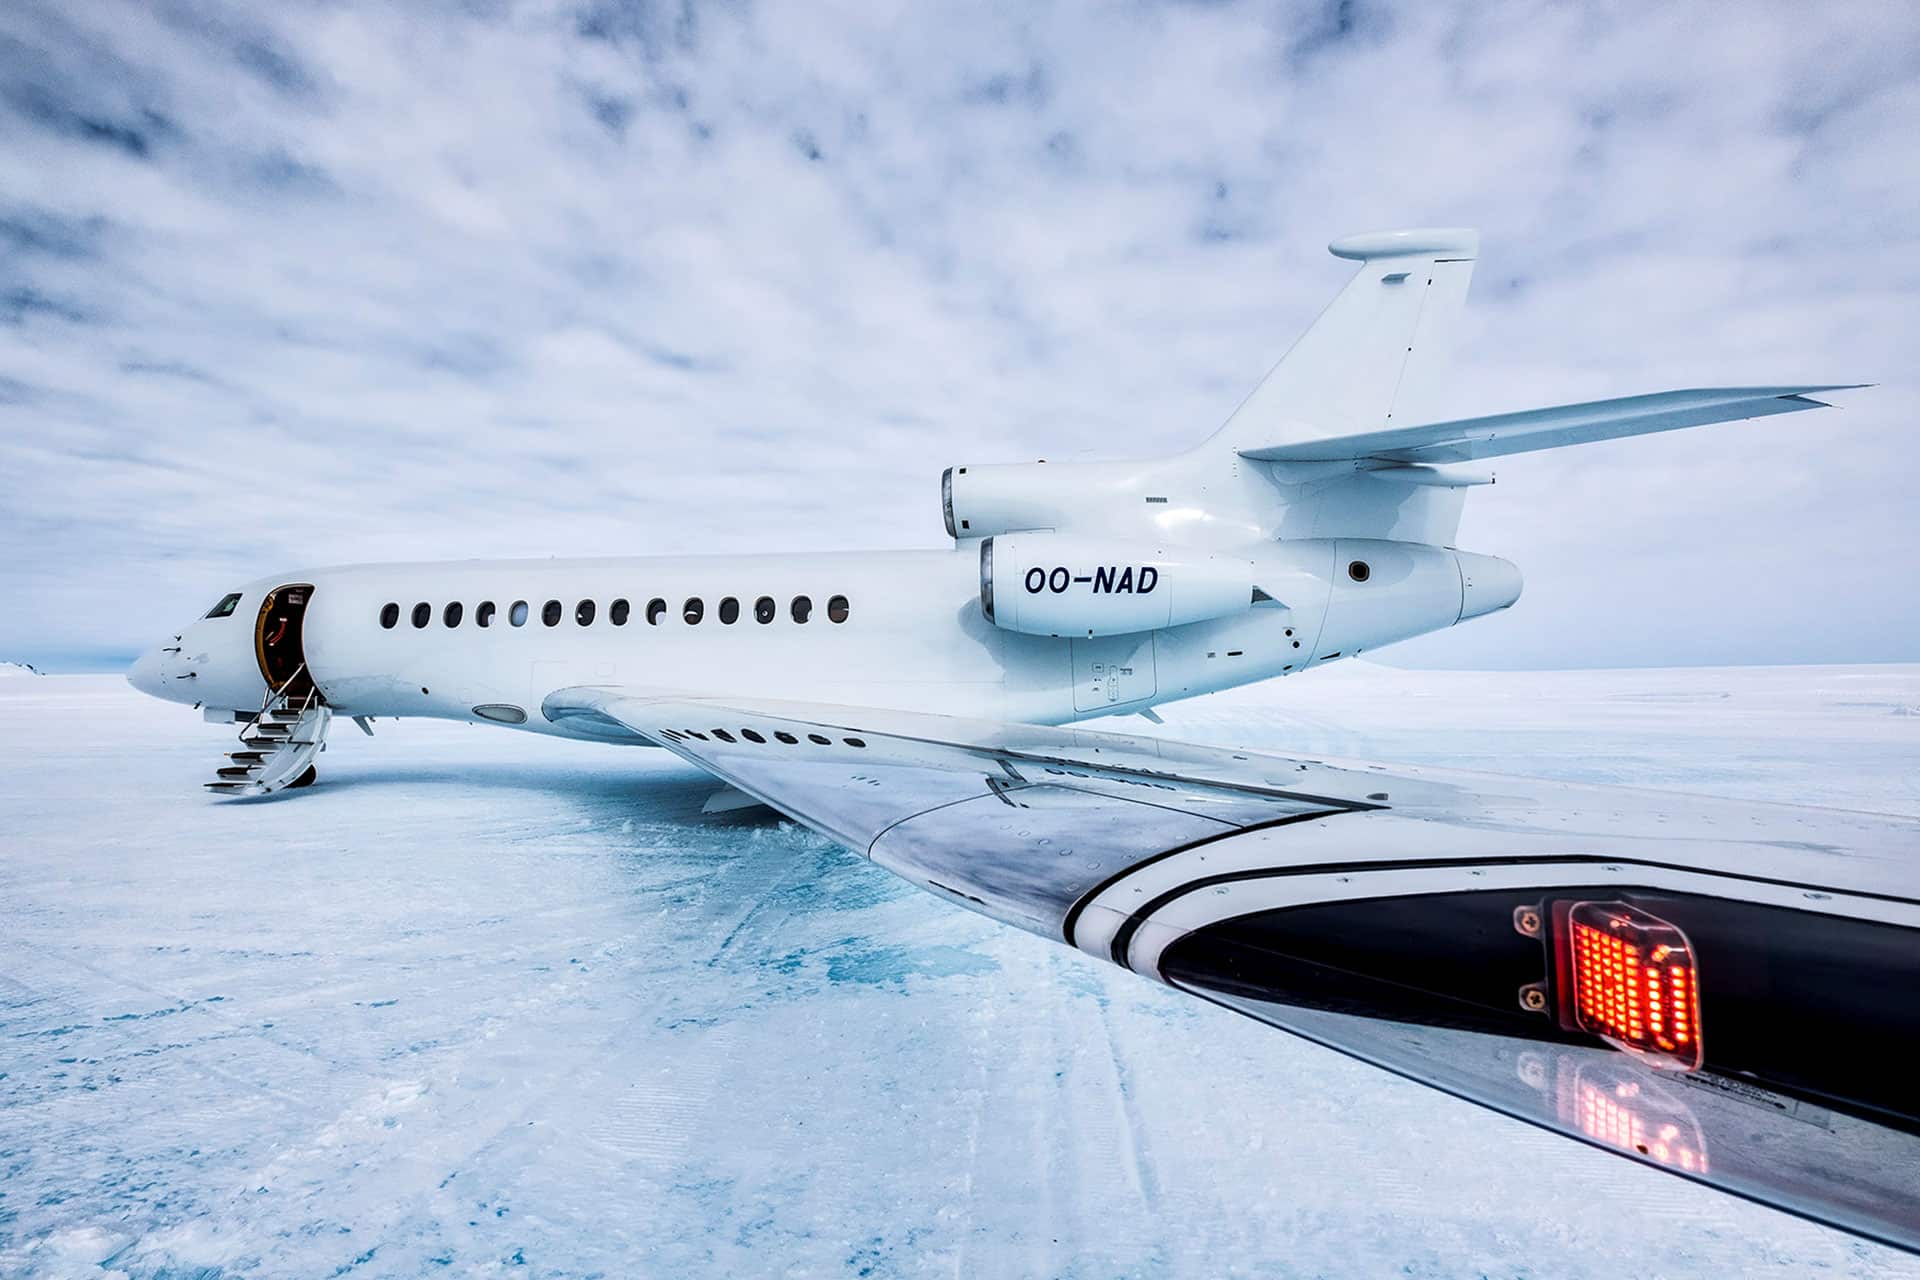 The Gulfstream jet on Wolf’s Fang Runway in Antarctica